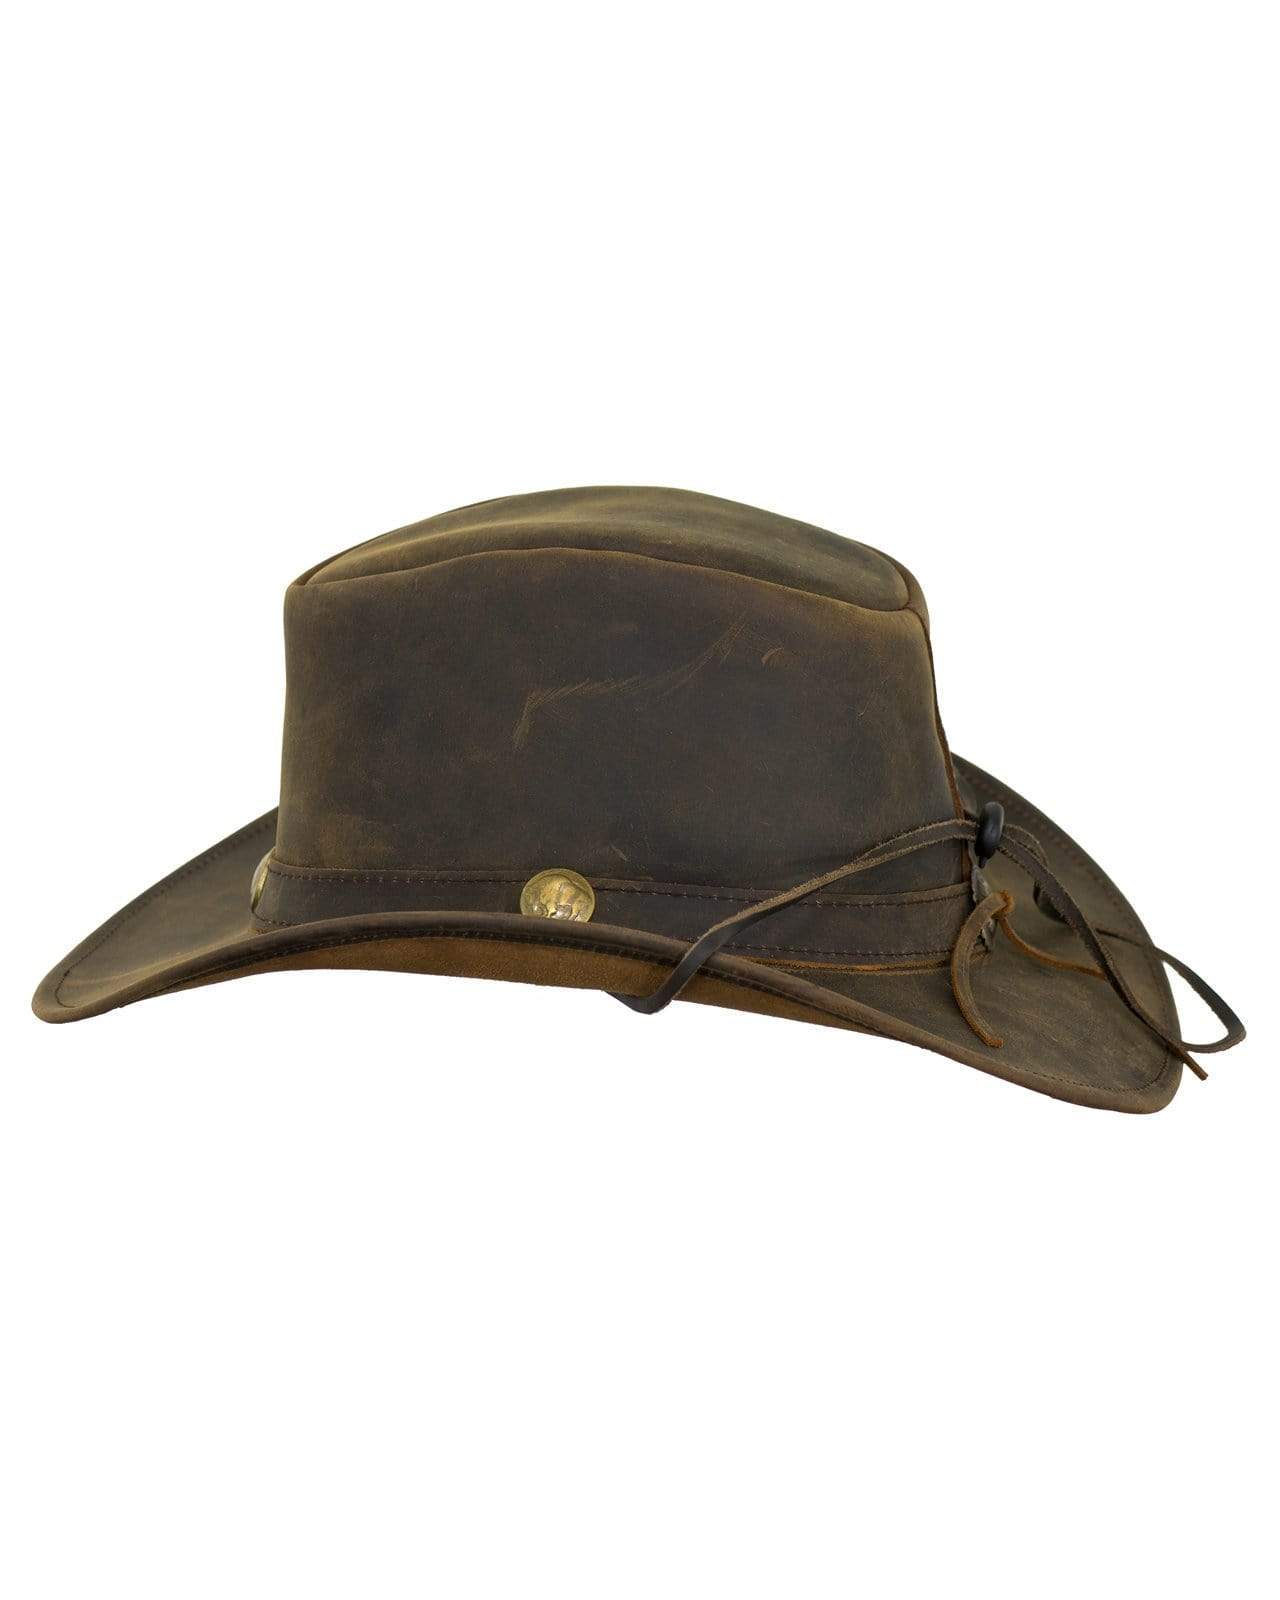 Outback Trading Company Cheyenne Hats